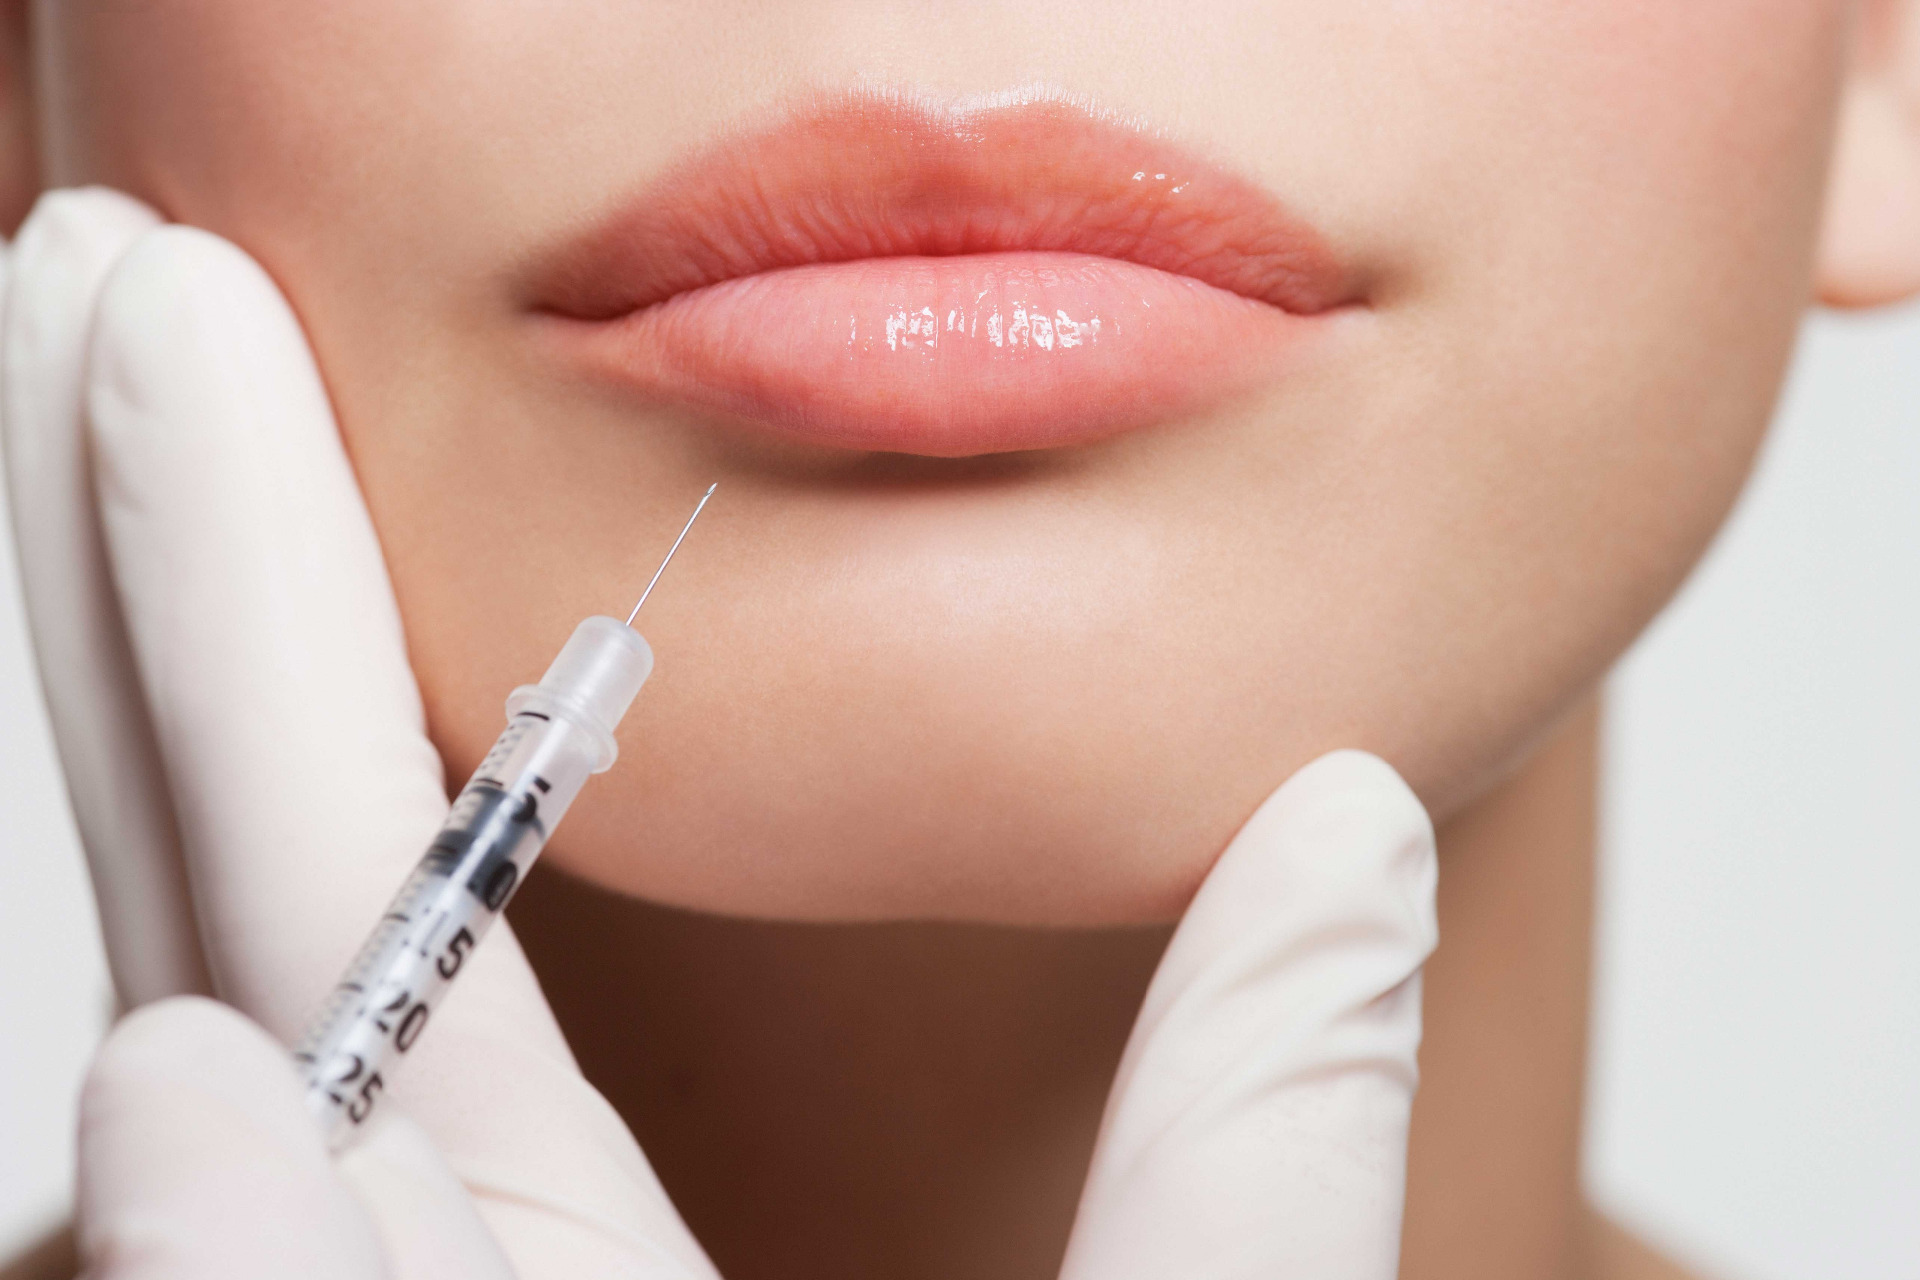 botox injections ﻿﻿colchester